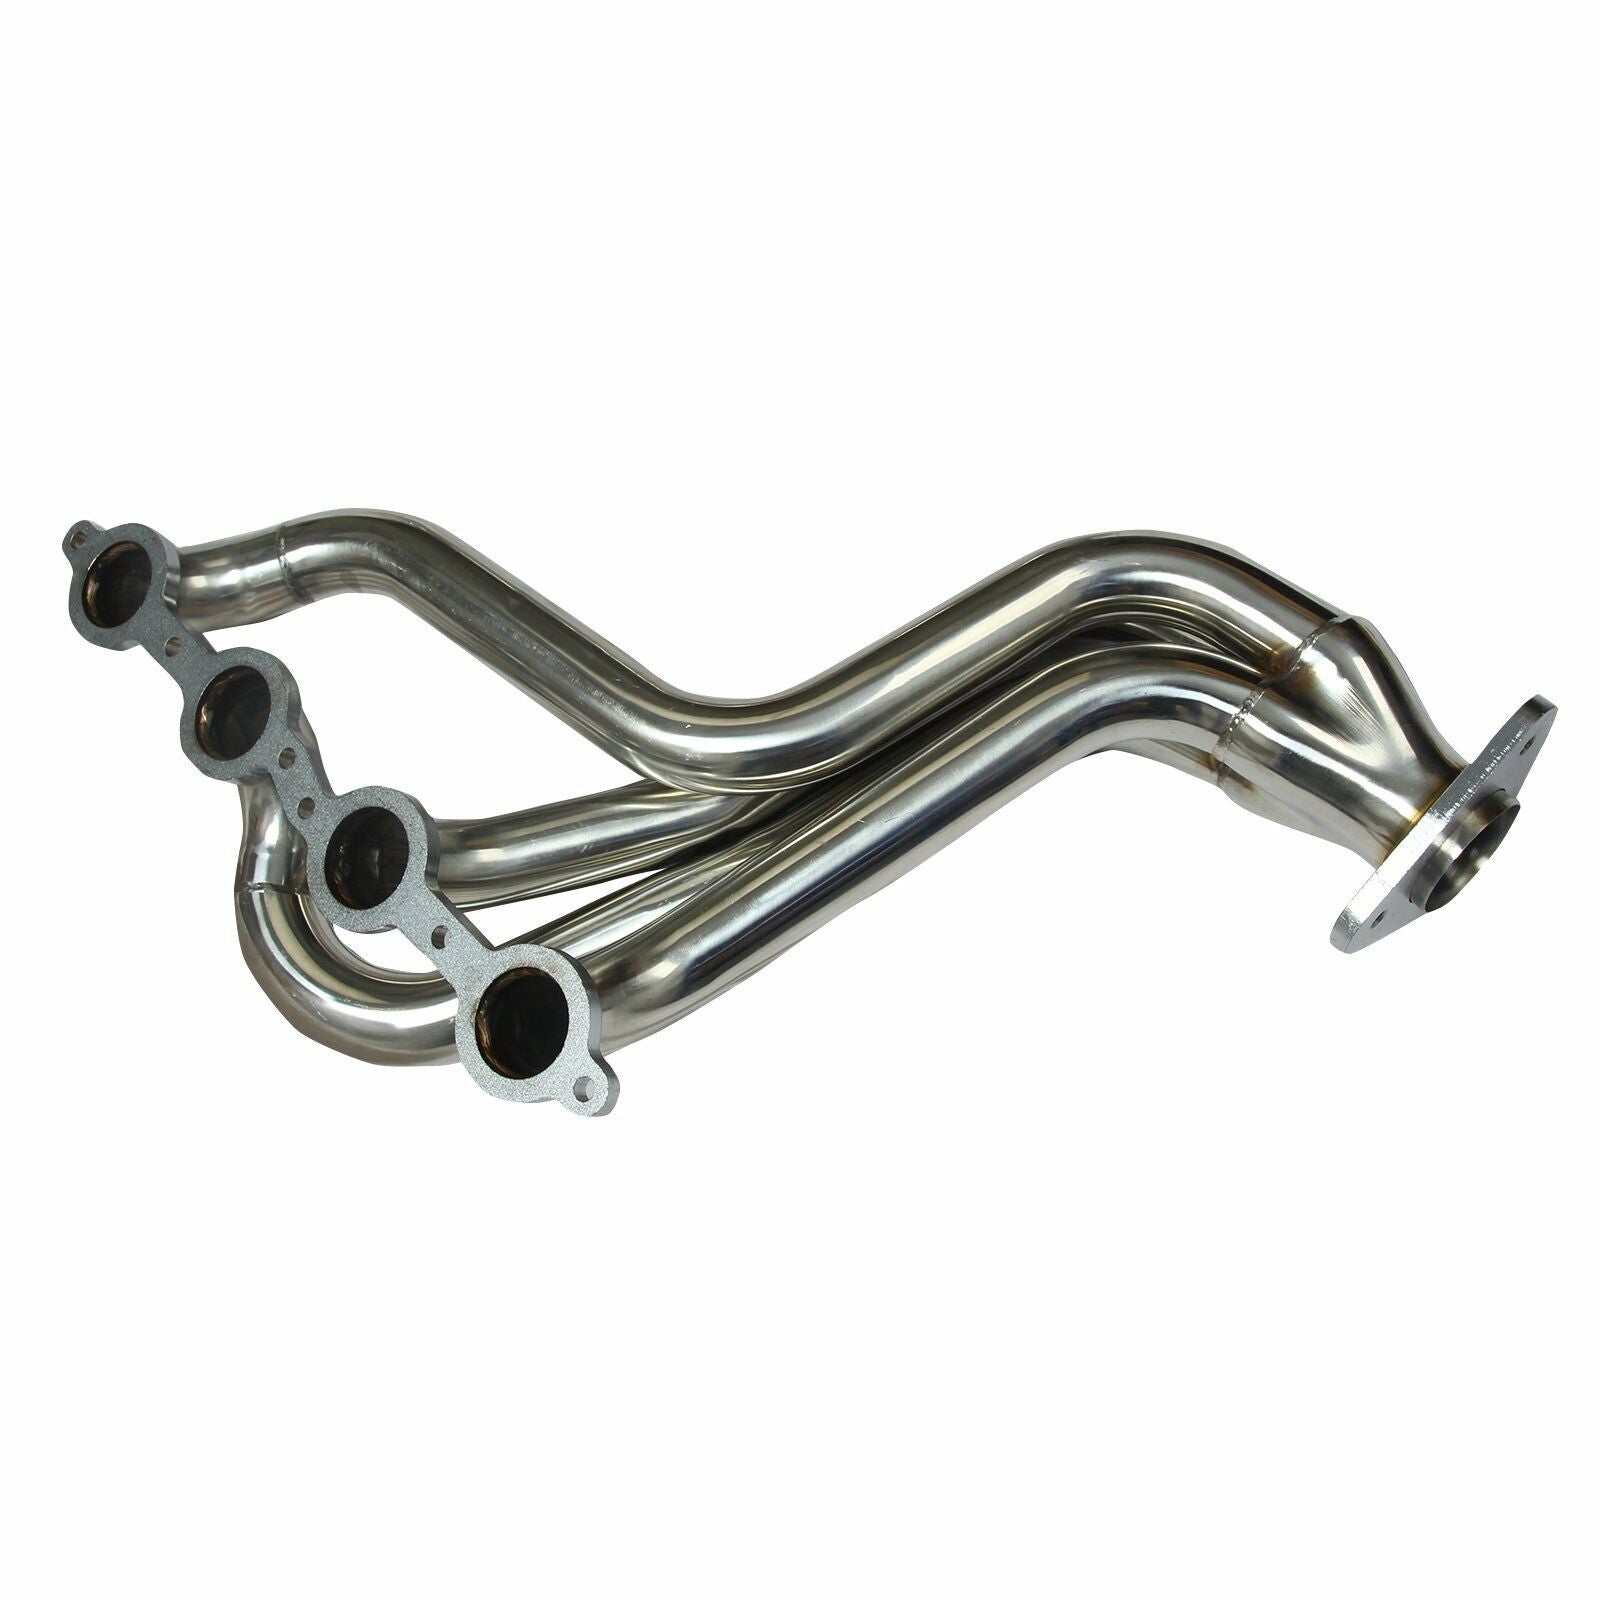 Exhaust Header & Y-Pipe For 1999-2005 Chevy GMT800 V8 Engine Truck - 0